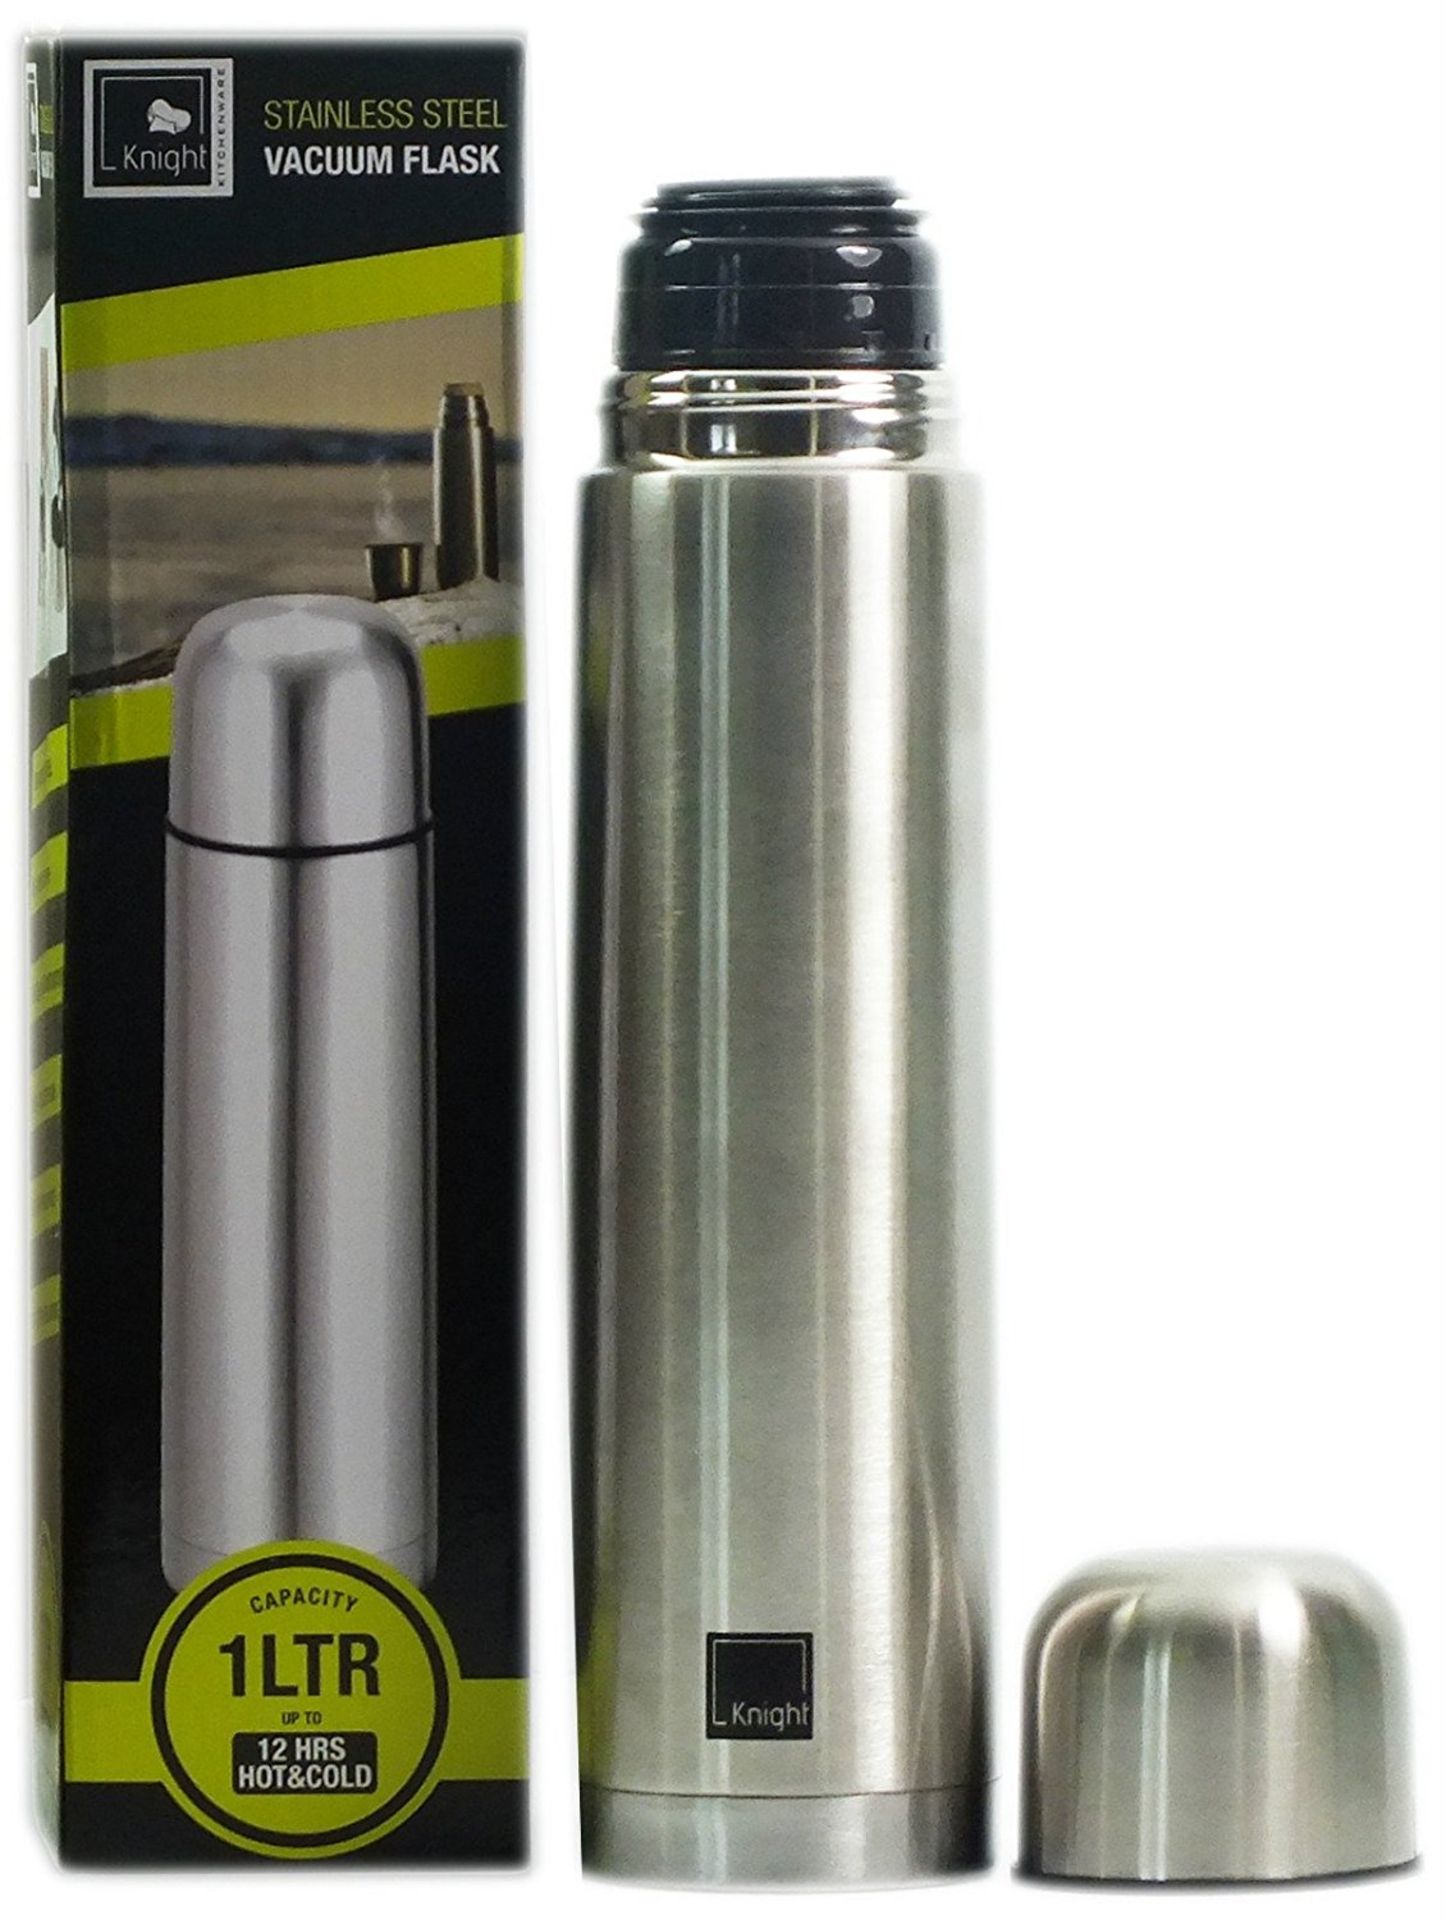 V Brand New 1 Litre Stainless Steel Picnic Camping Thermal Hot & Cold Drink Vacuum Flask X 2 YOUR